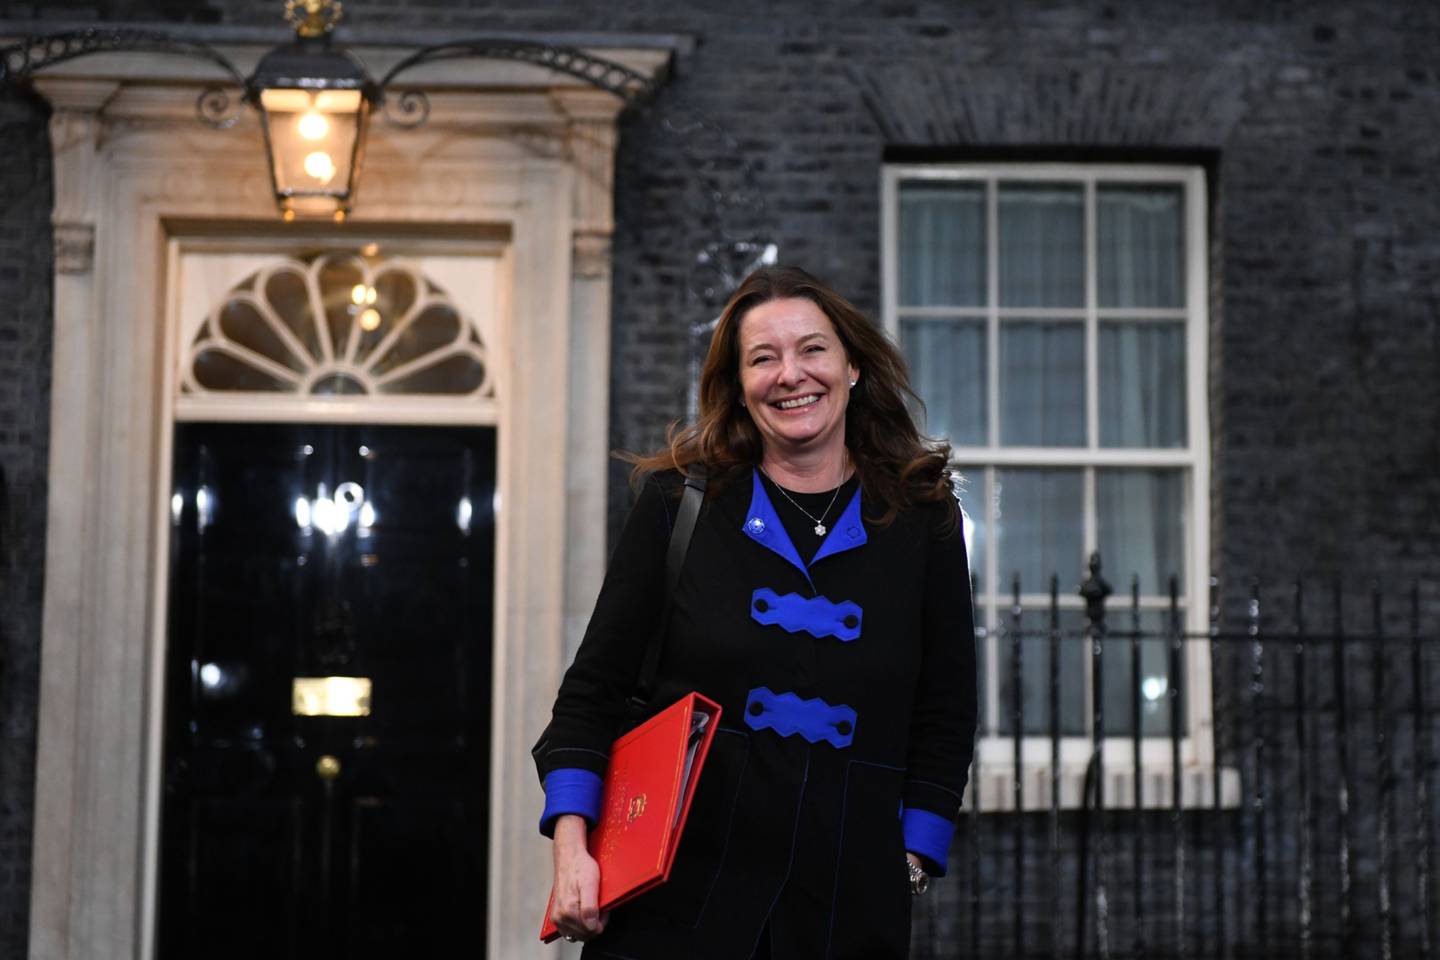 Gillian Keegan leaves 10 Downing Street after being appointed UK education secretary, its fifth in 12 months. Bloomberg